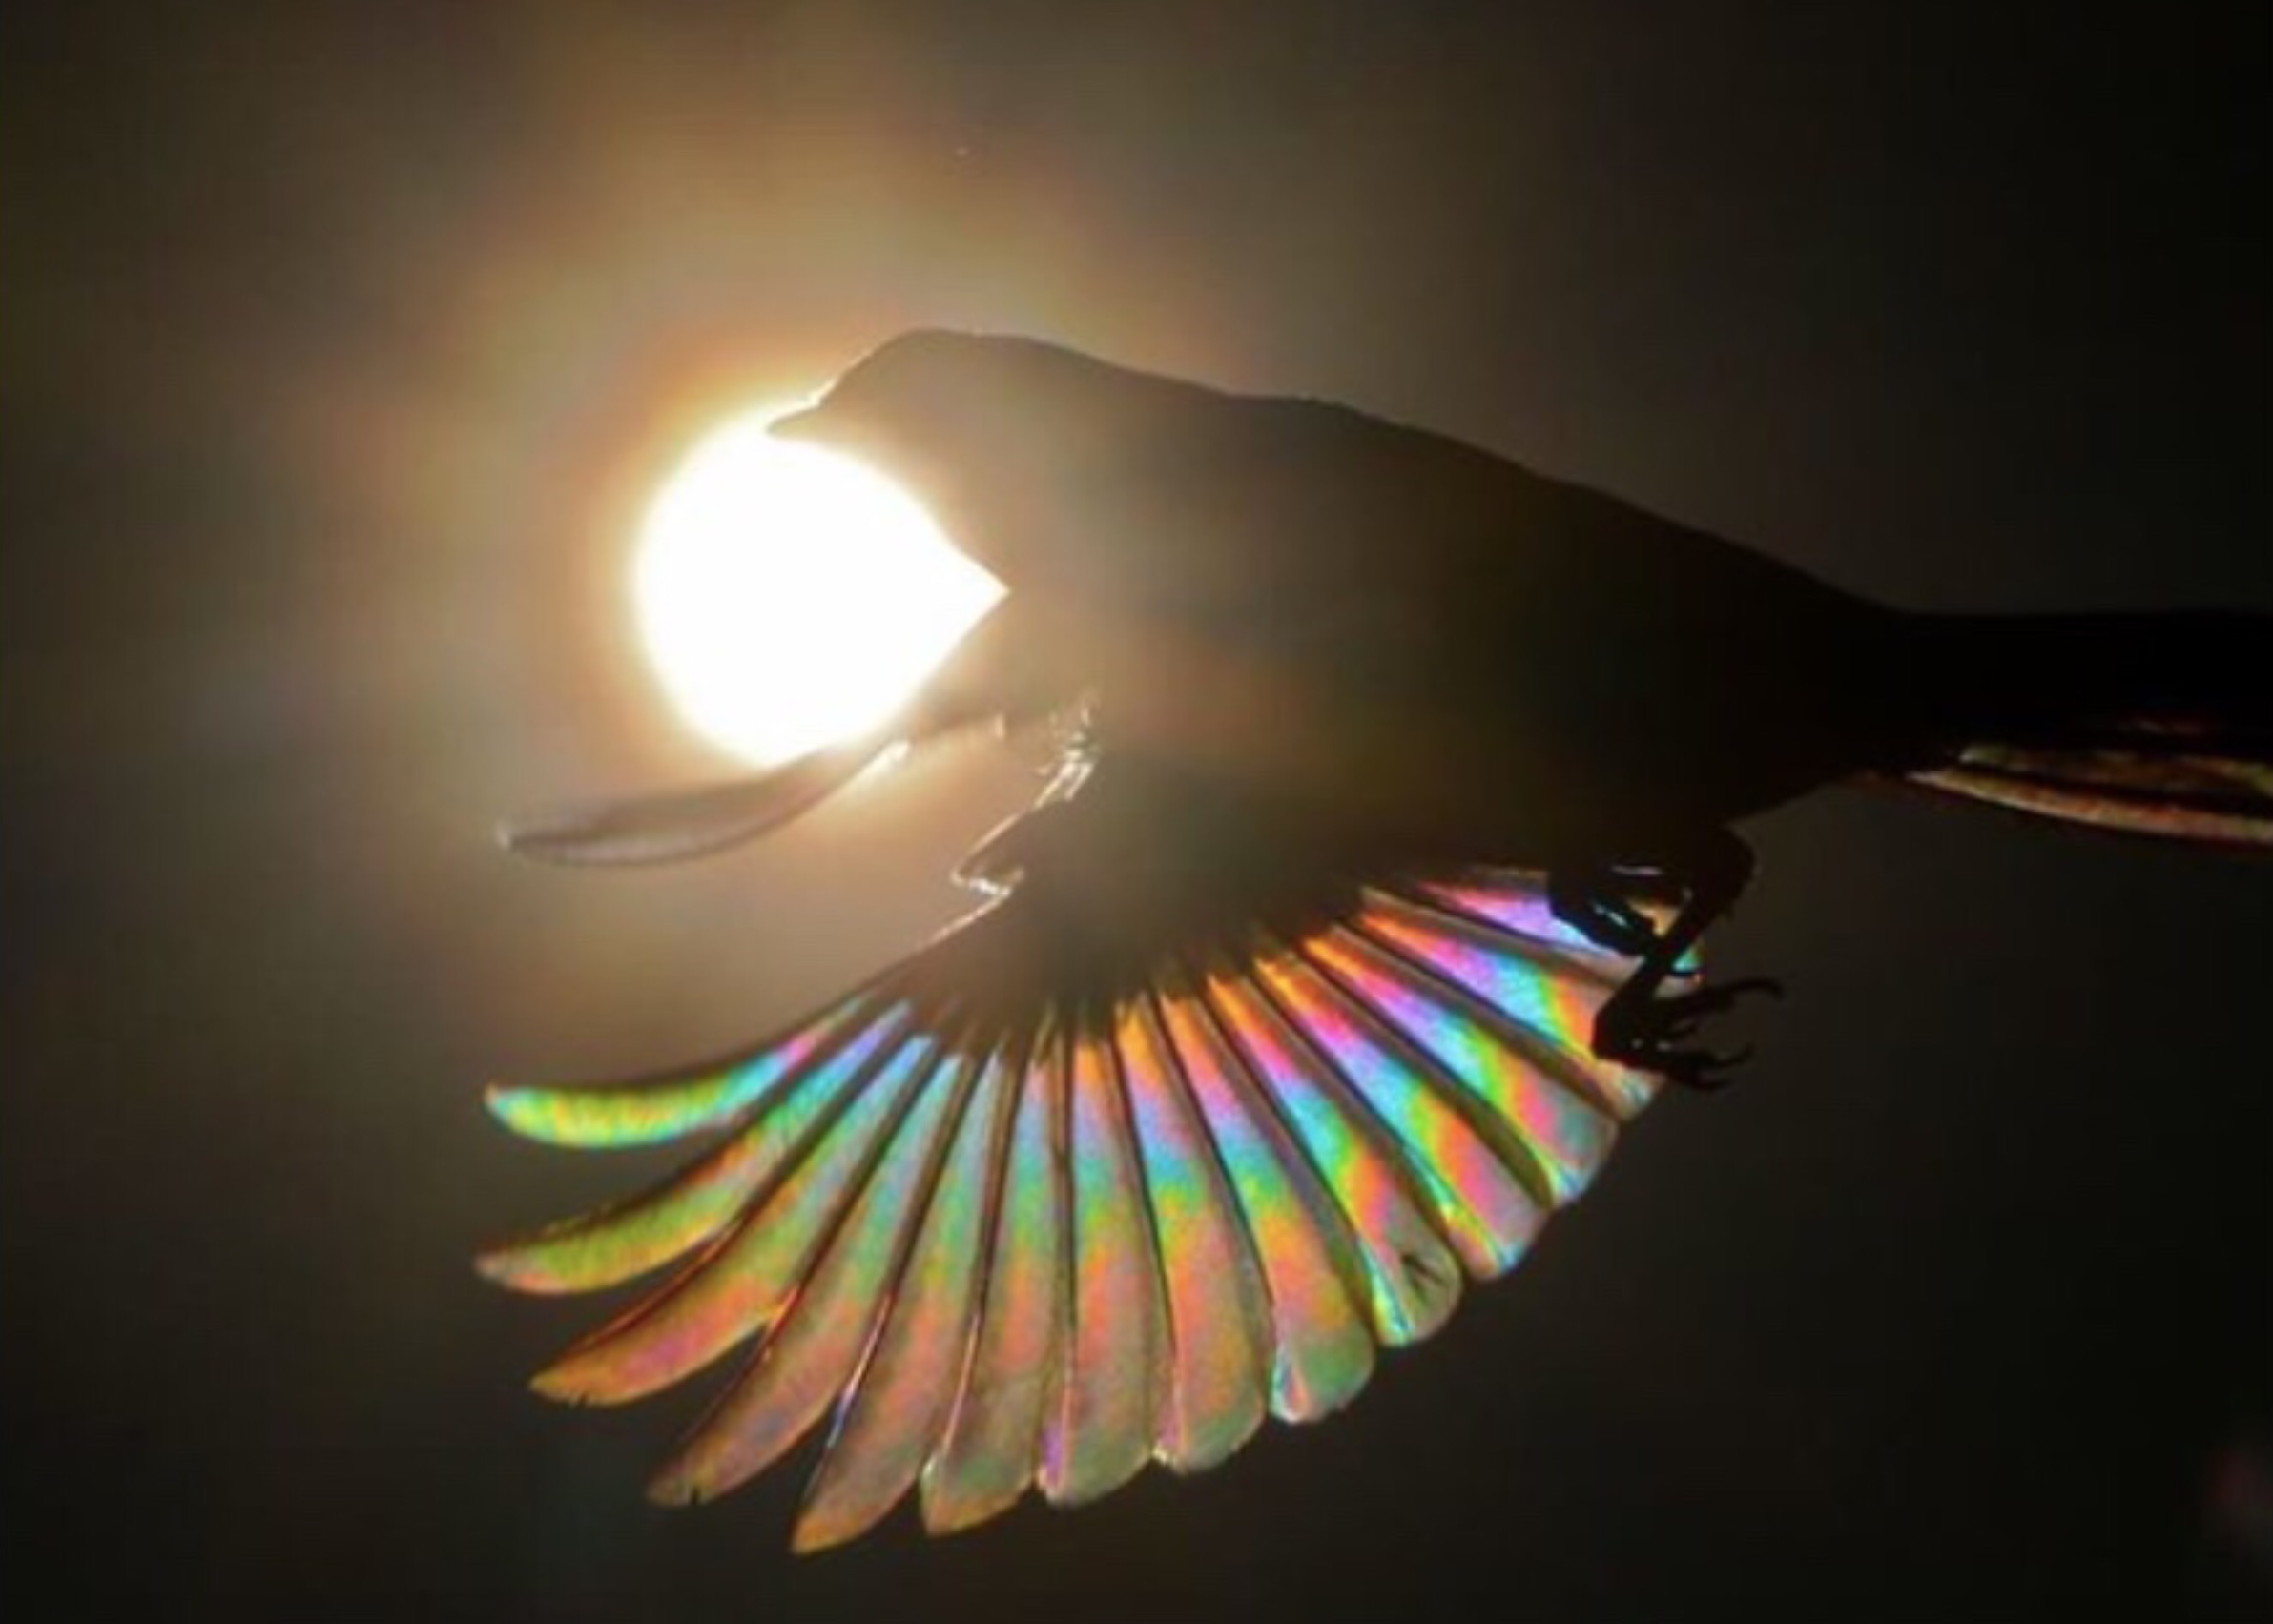 Hummingbirds fly with a unique method of rotating the entire wing, with little or no flexing of the wrist or hand joints.